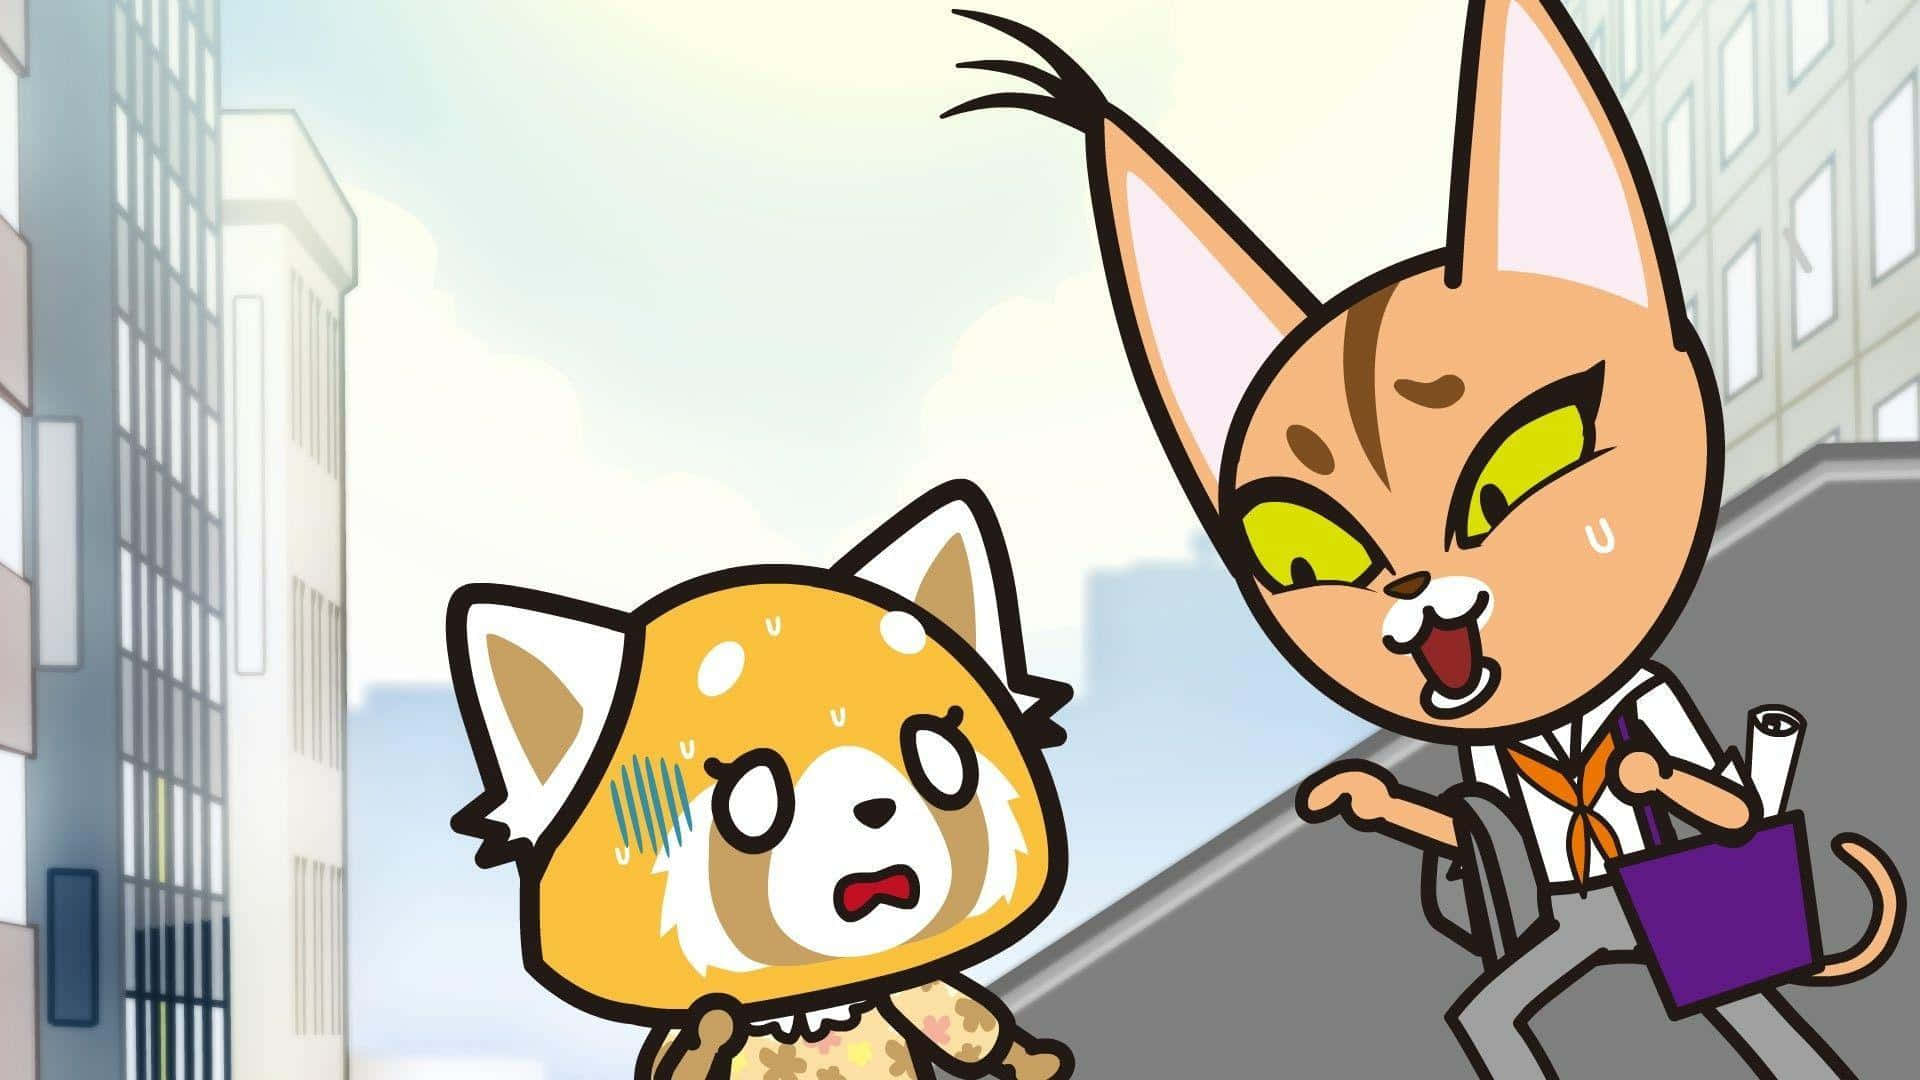 Follow Aggretsuko's Lead, Embrace Your Inner Rage